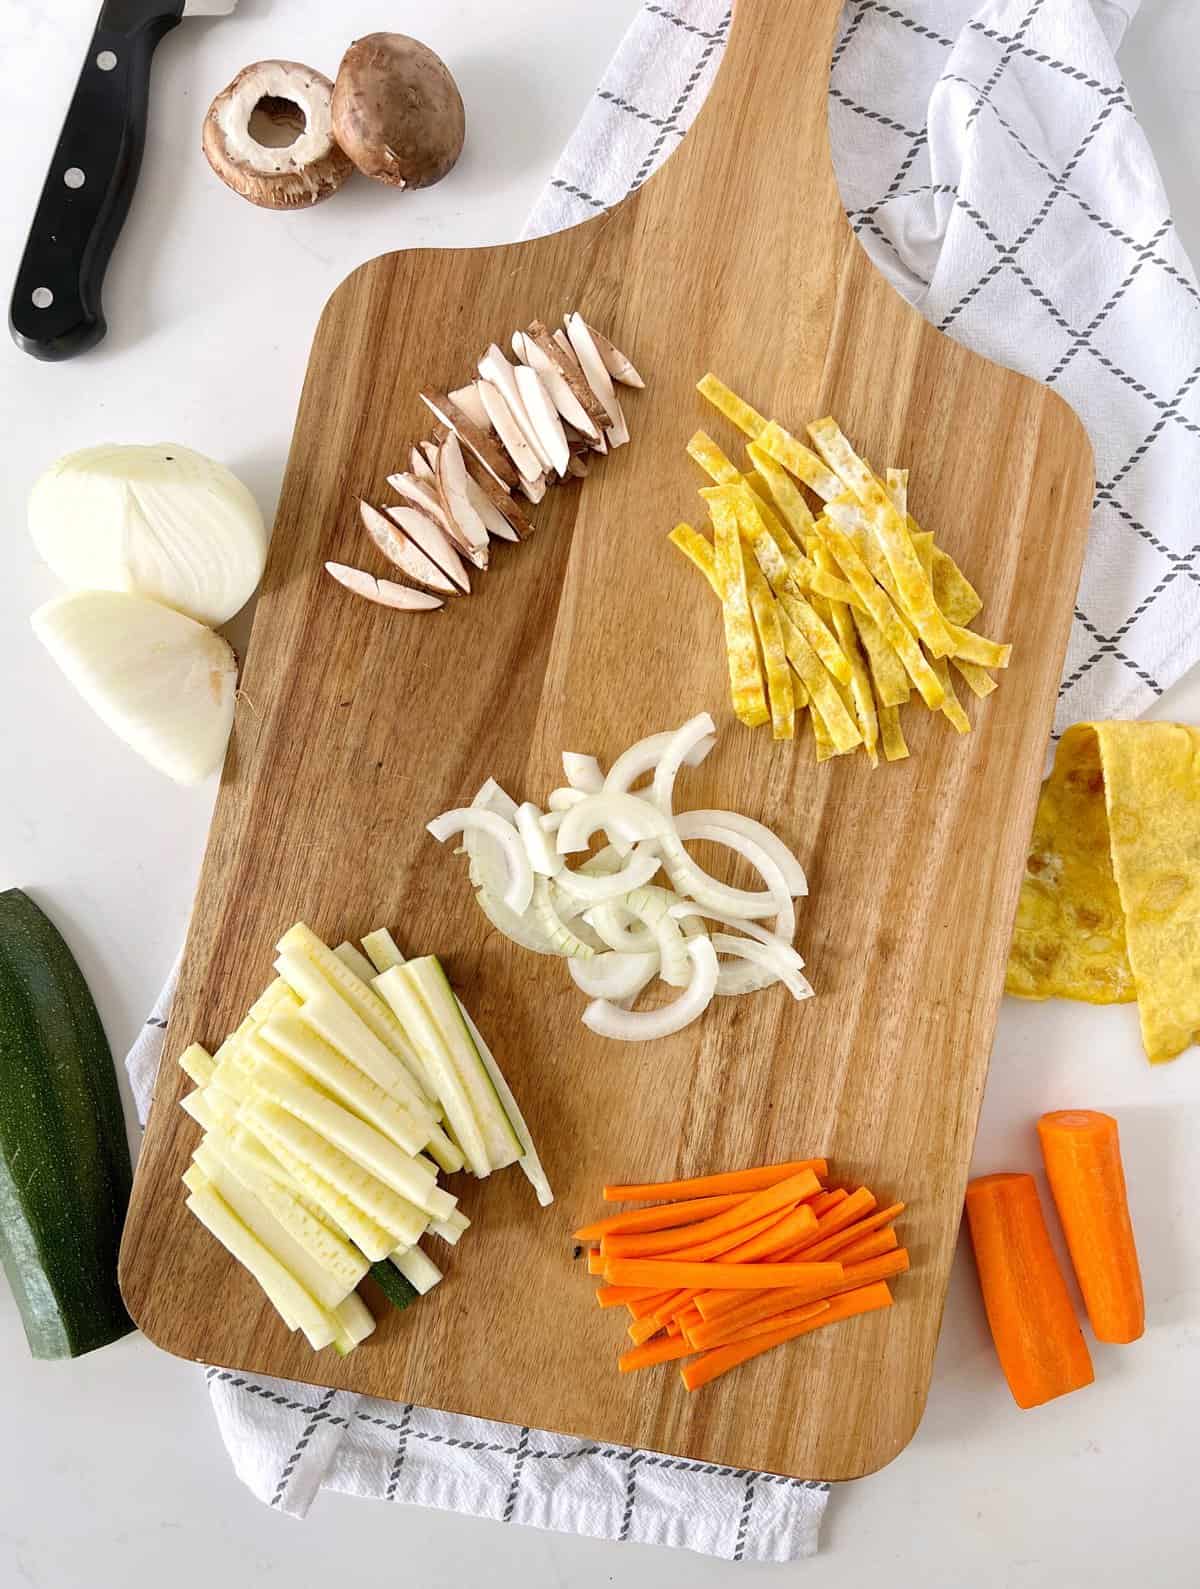 julienned vegetables on a wooden chopping board 